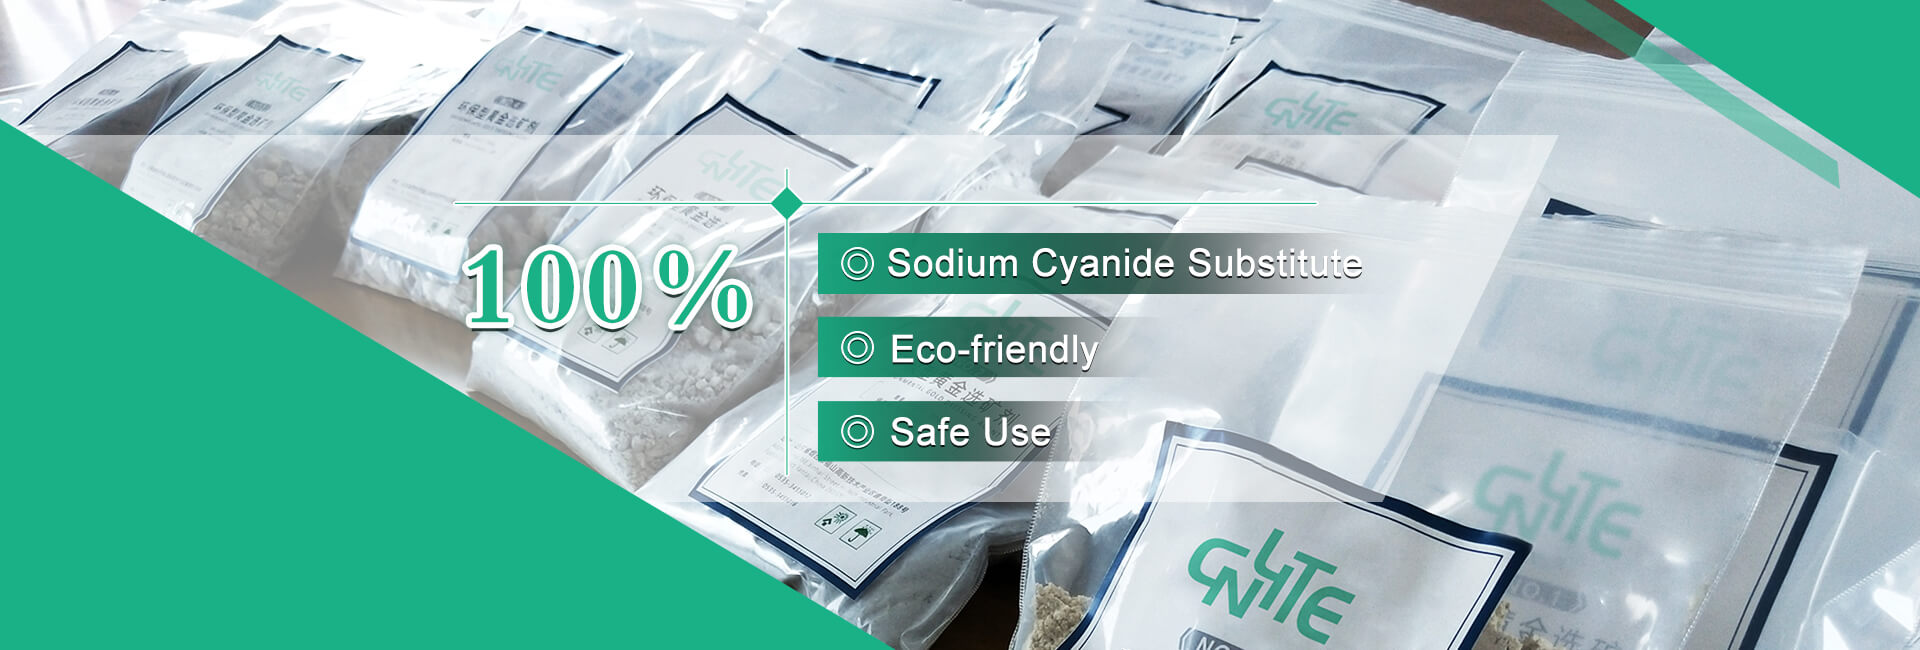 100% Sodium Cyanide Substitute  100% Eco-friendly 100% Safe Use